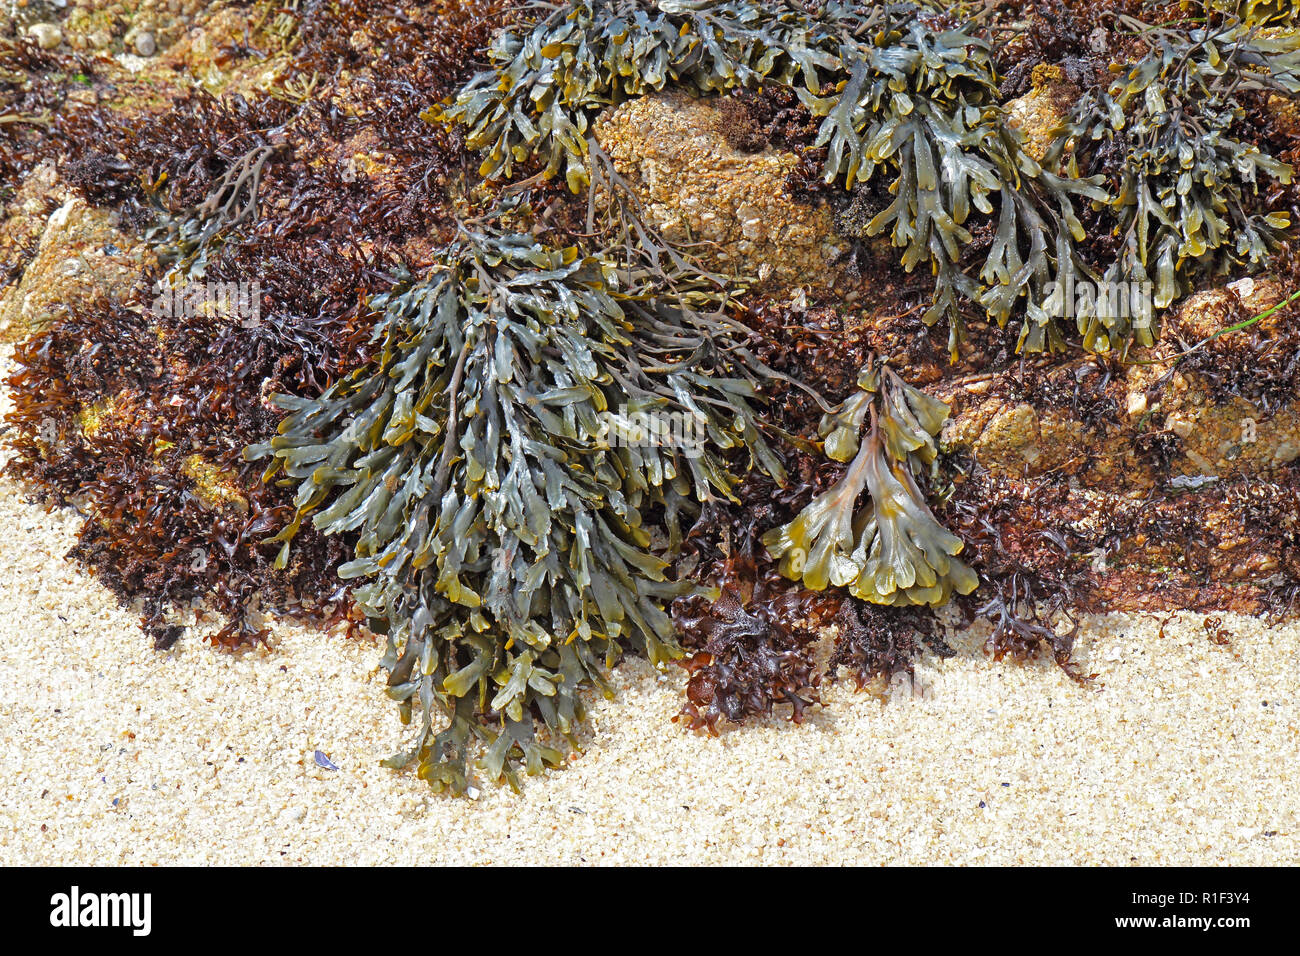 Olive rockweed (Hesperophycus californicus, center, upper right), the related brown alga Fucus distichus (right of center) and other algae (probably s Stock Photo